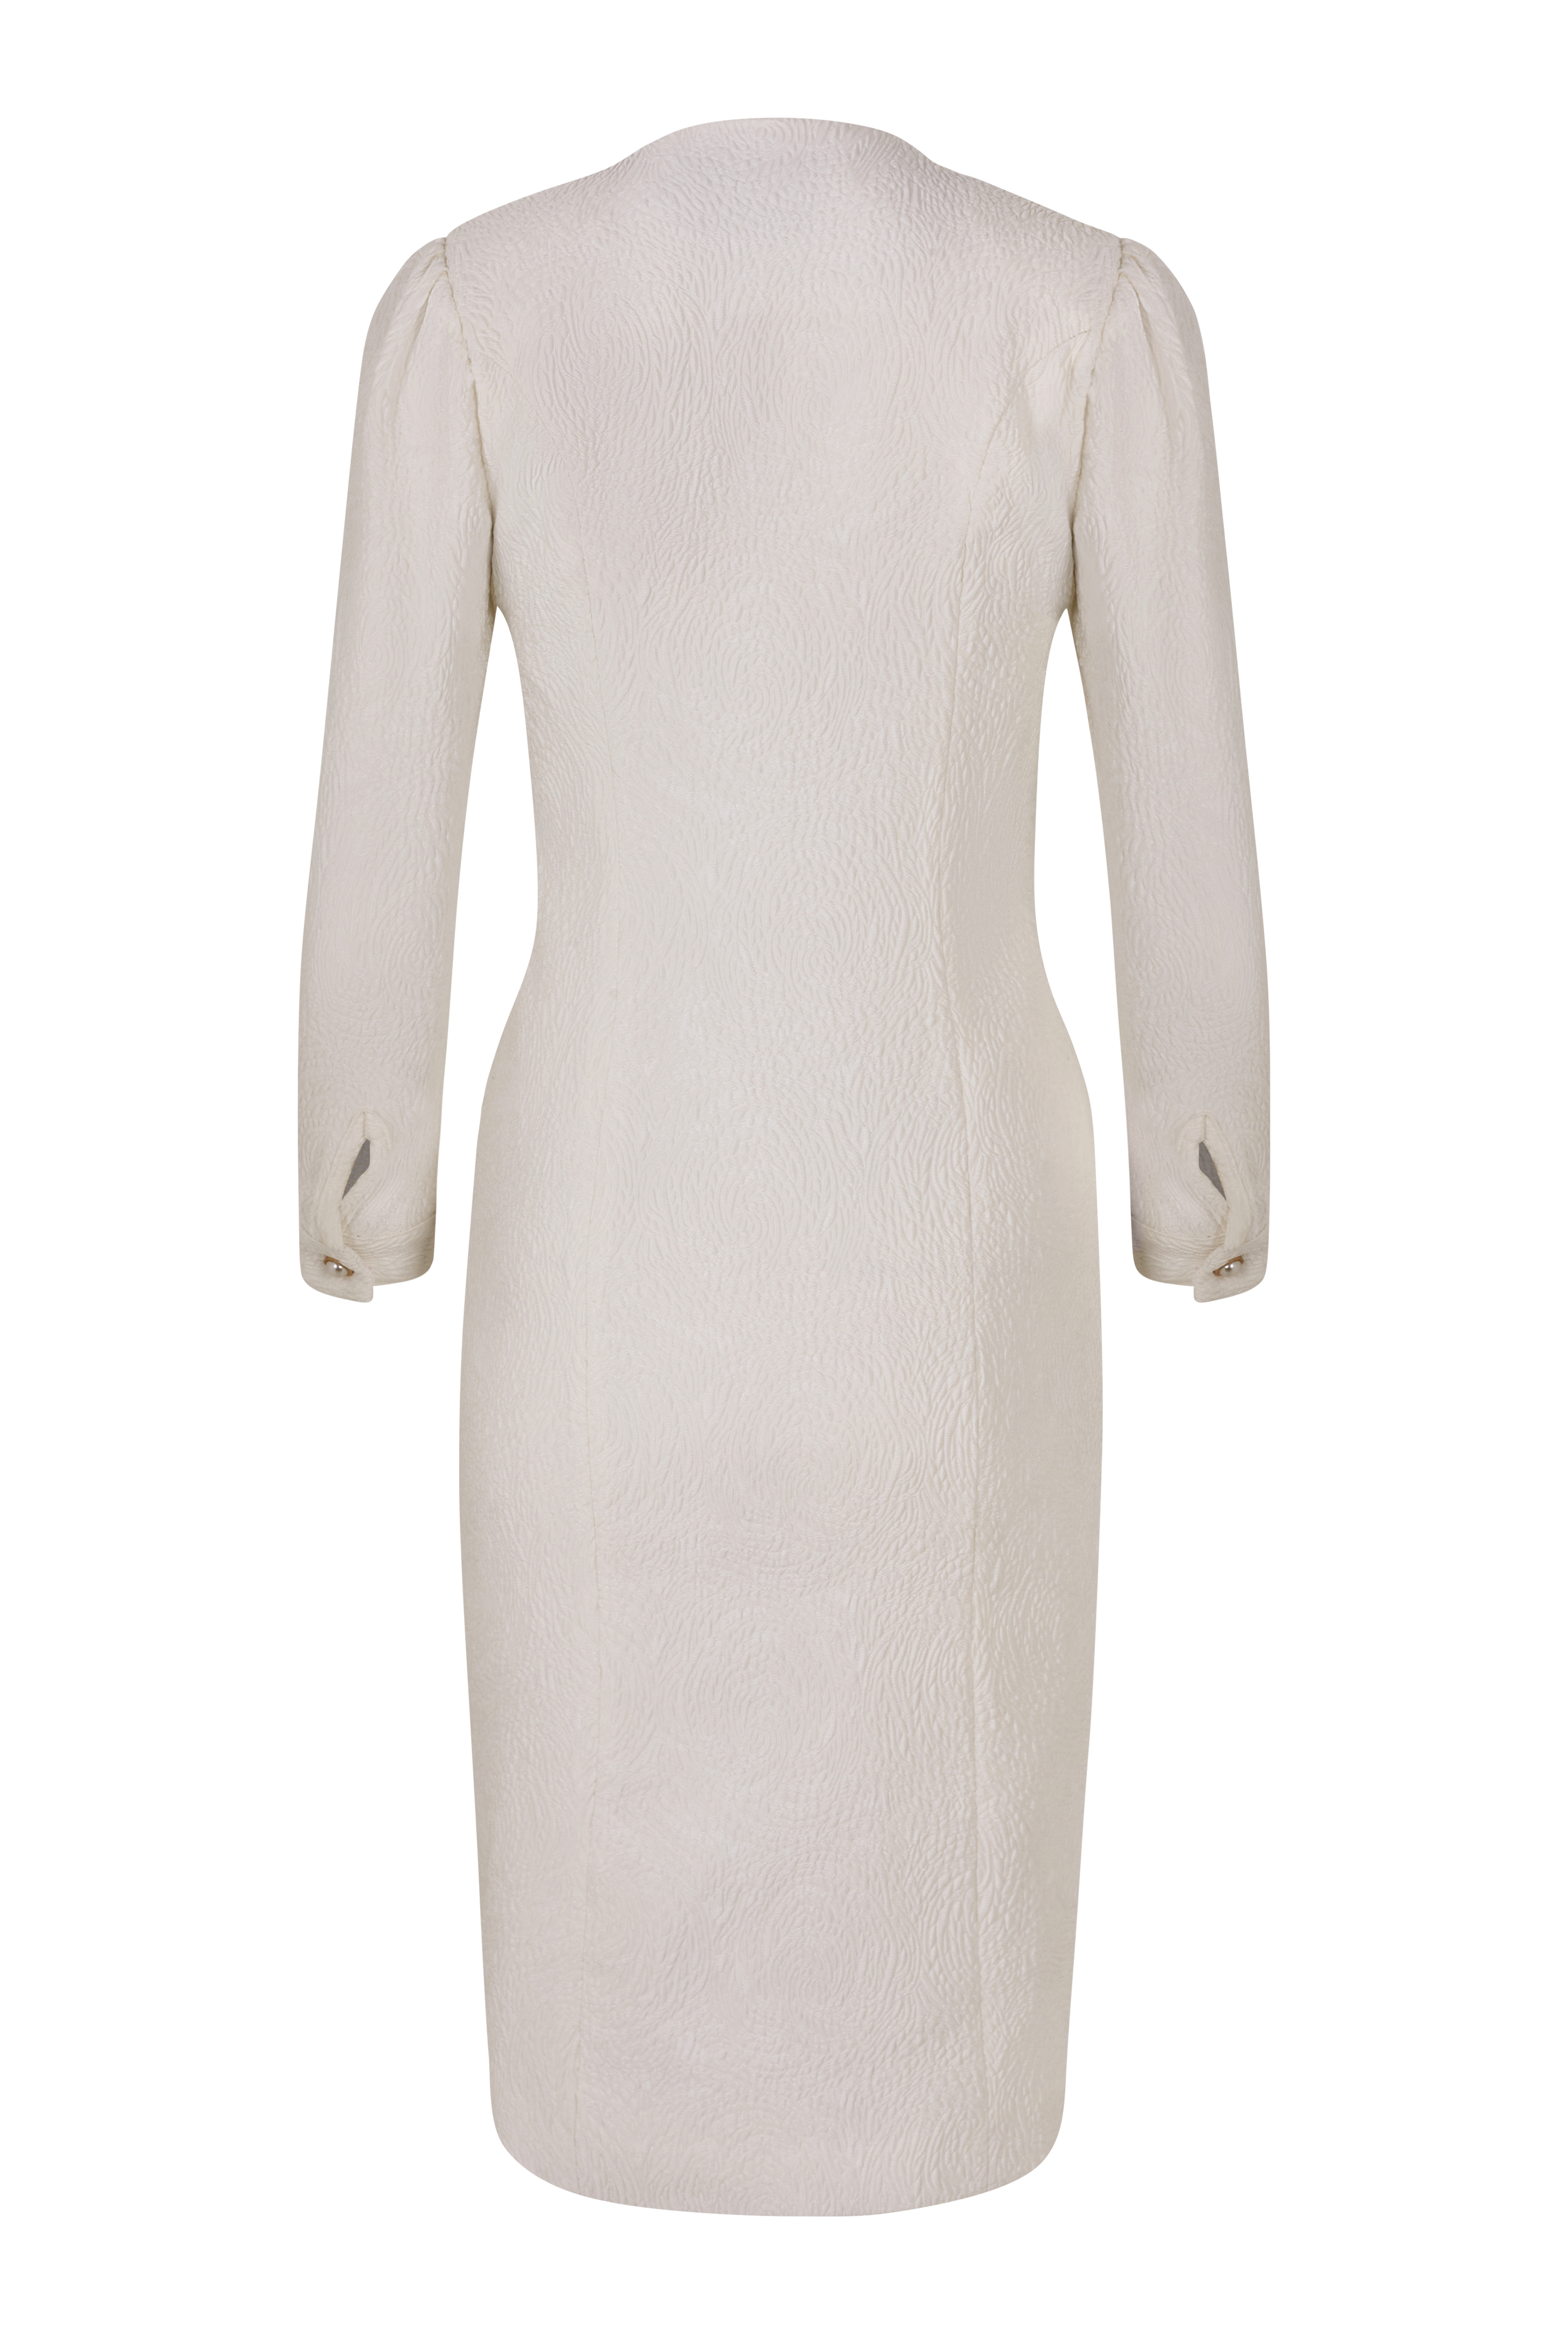 Nº01 MIDI DRESS WITH PEARL JEWEL BUTTONS | Wedding Collection